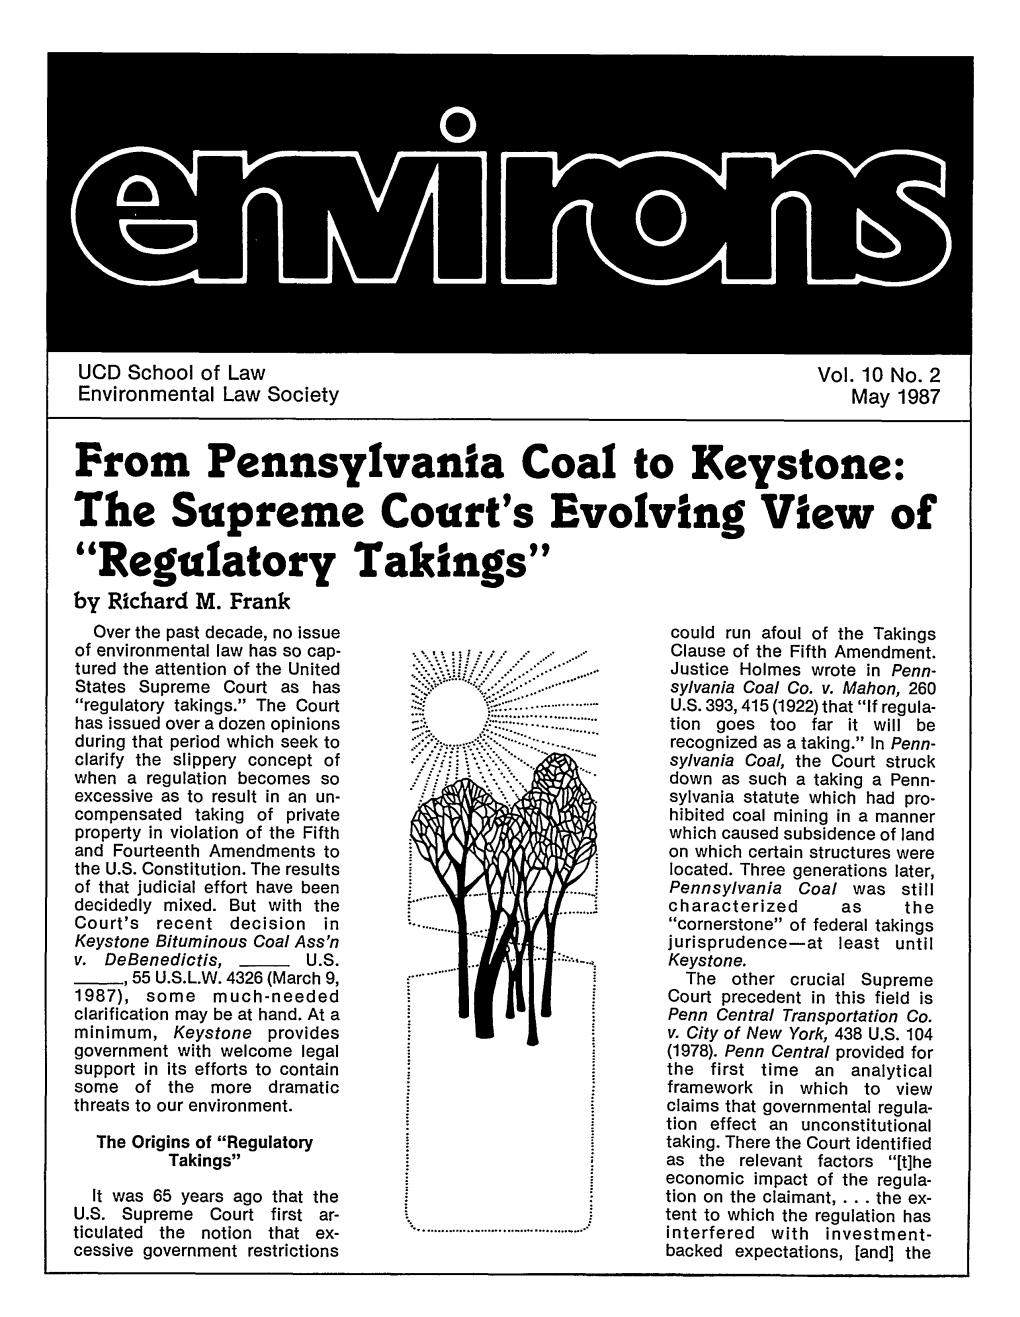 From Pennsylvania Coal to Keystone: the Supreme Court's Evolving View of "Regulatory Takings" by Richard M